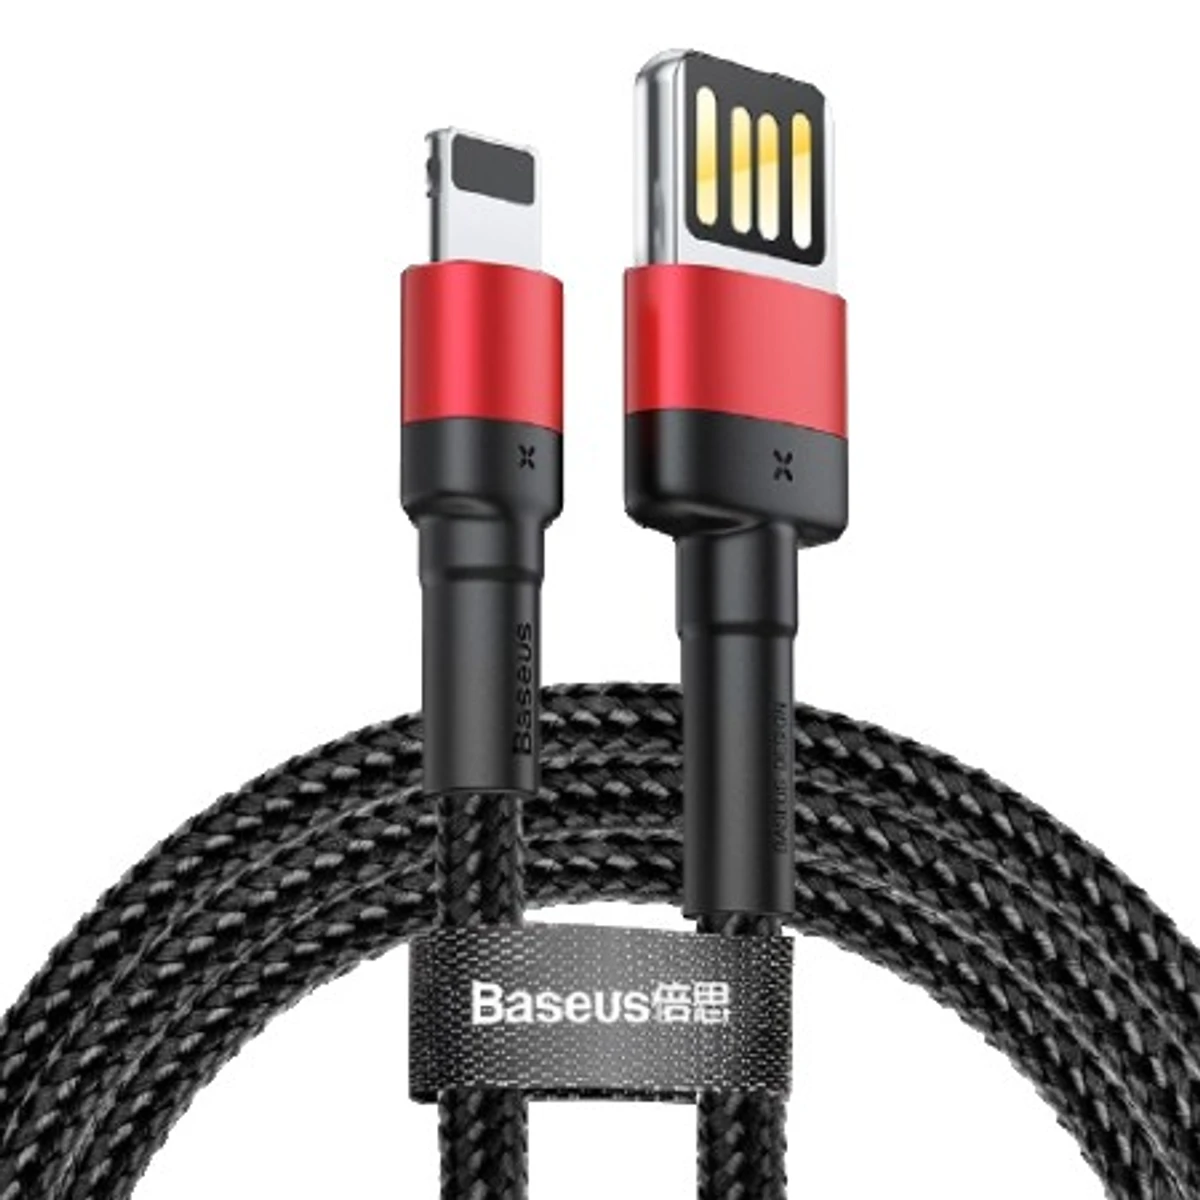 Baseus Reversible USB Charging Cable for i-Phn